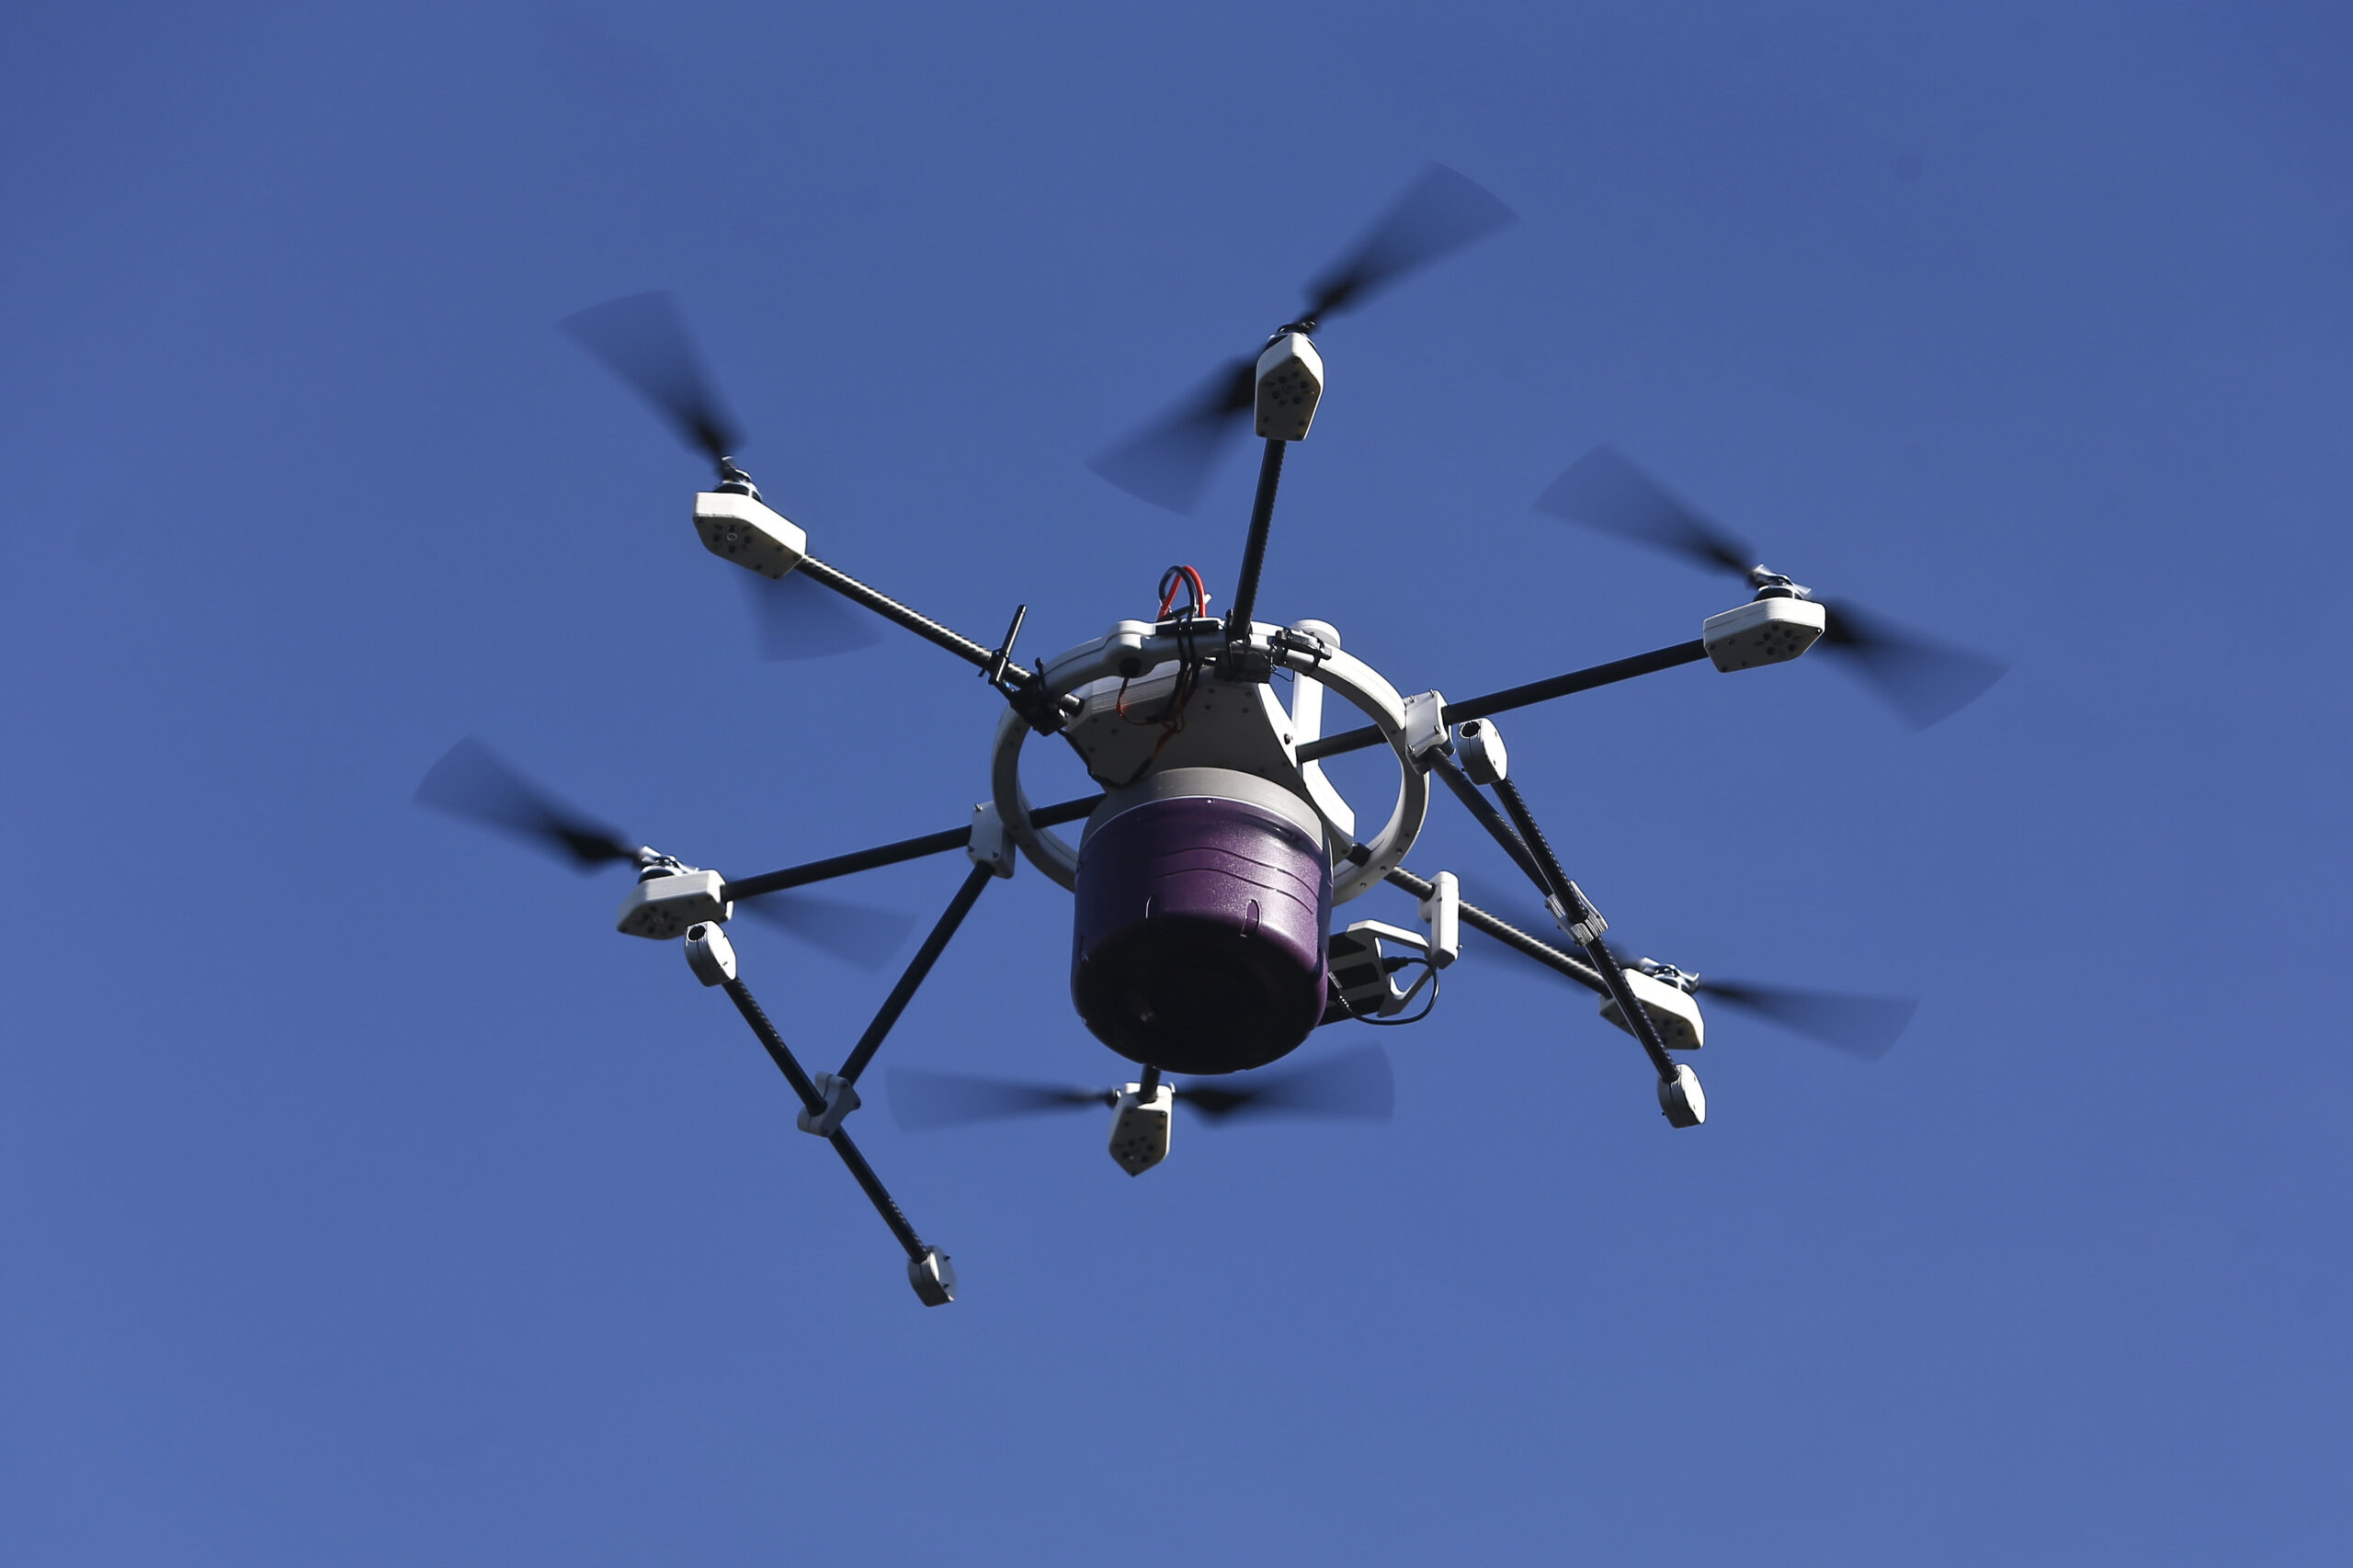 Is Optus an obstacle in drone delivery? 